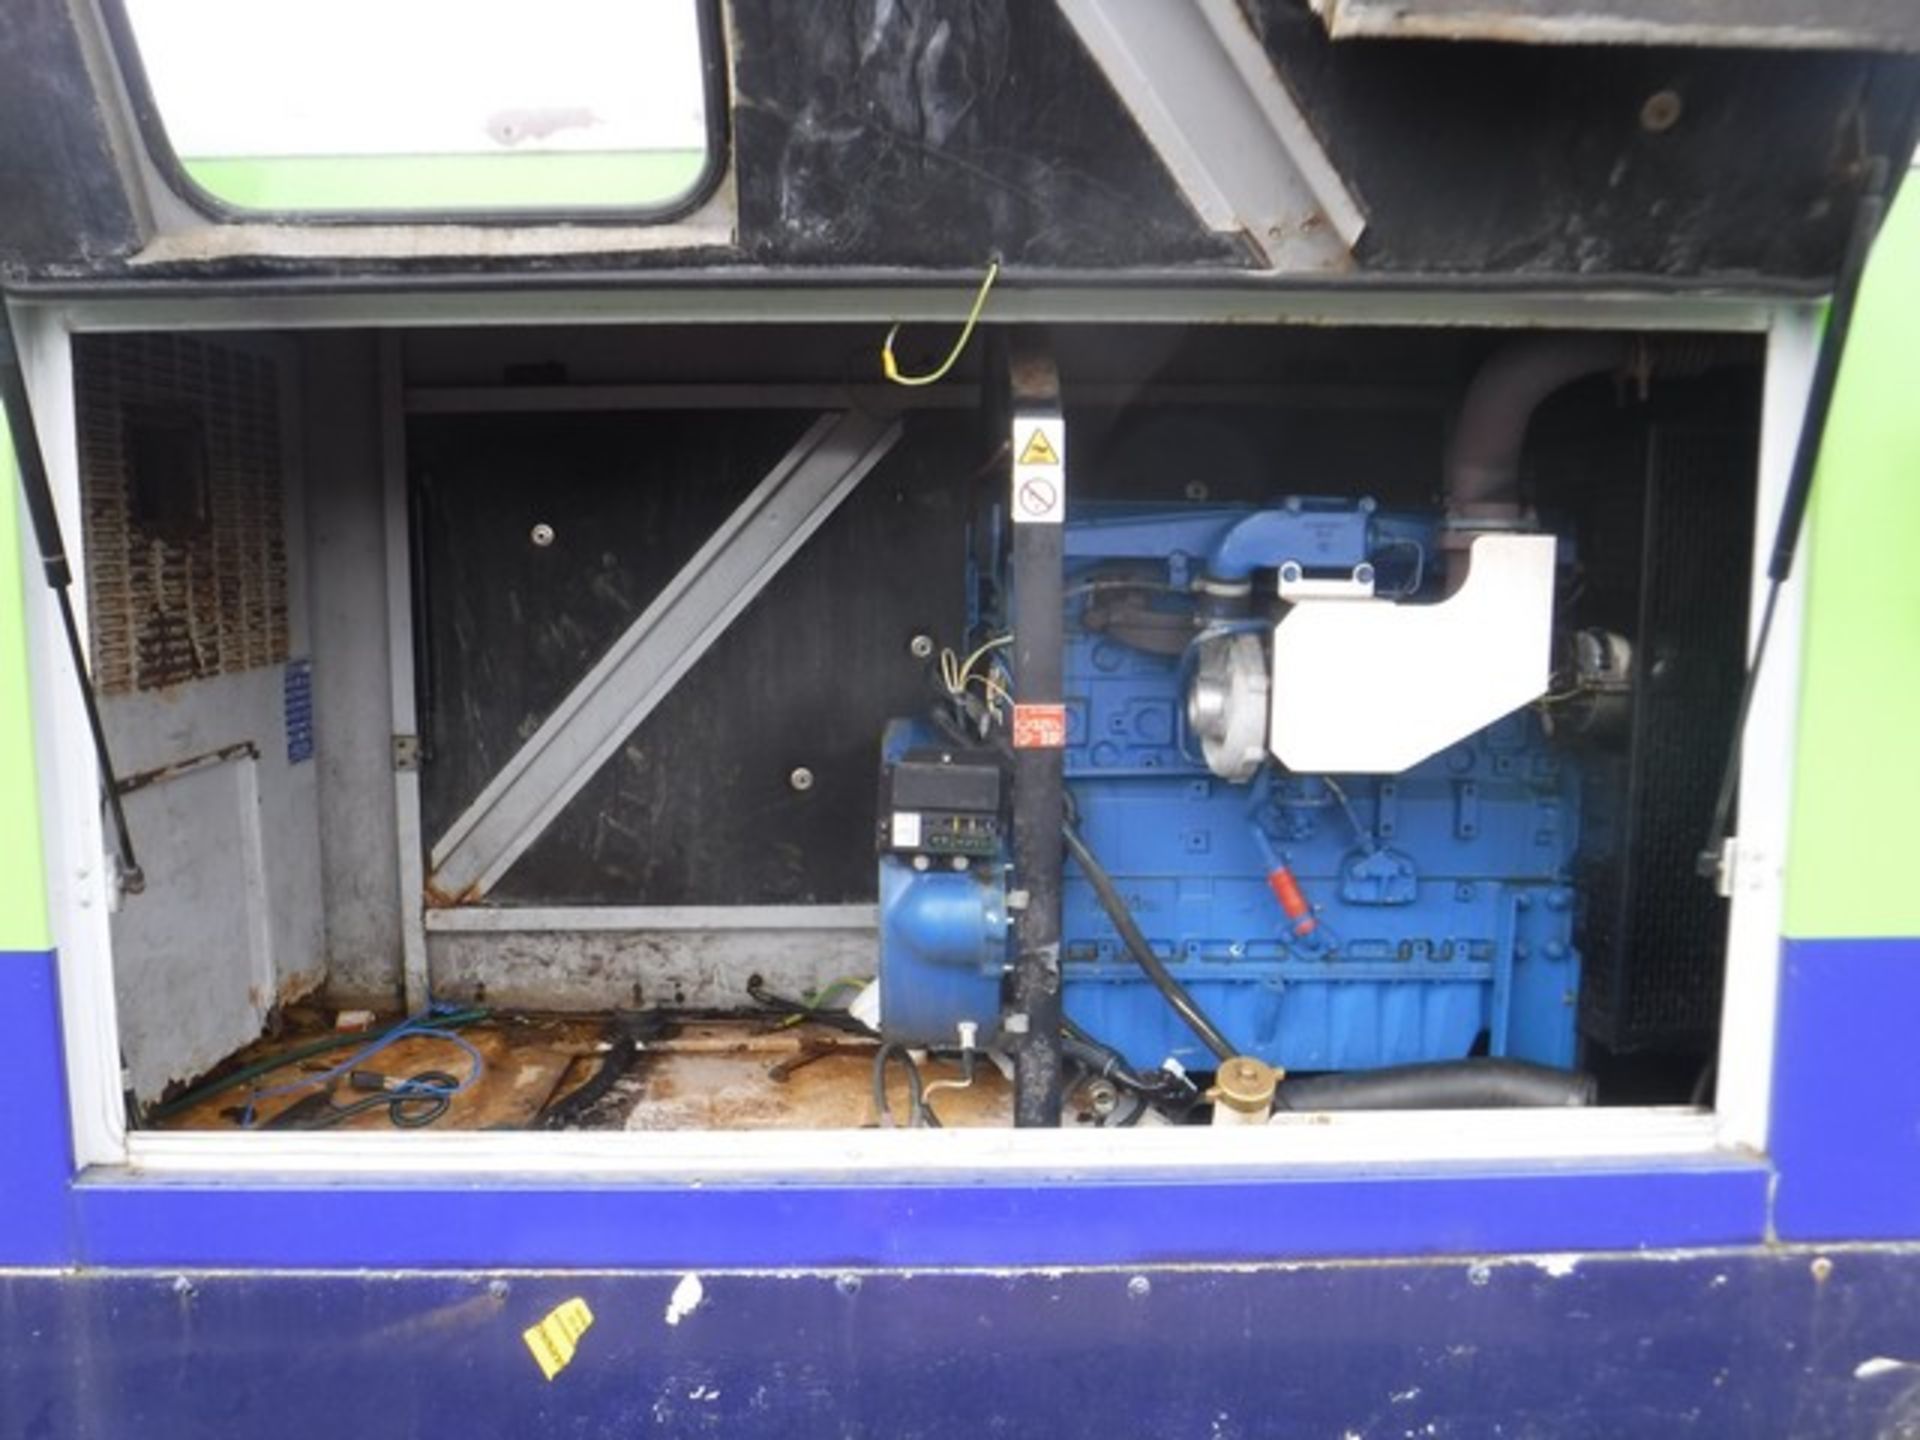 GENERATOR WITH TRAILER, TYPE P100, 100KVA,415 VOLTS, 80KW. S/N FGWPEP04JE, ASSET - 747-3035 - Image 11 of 12